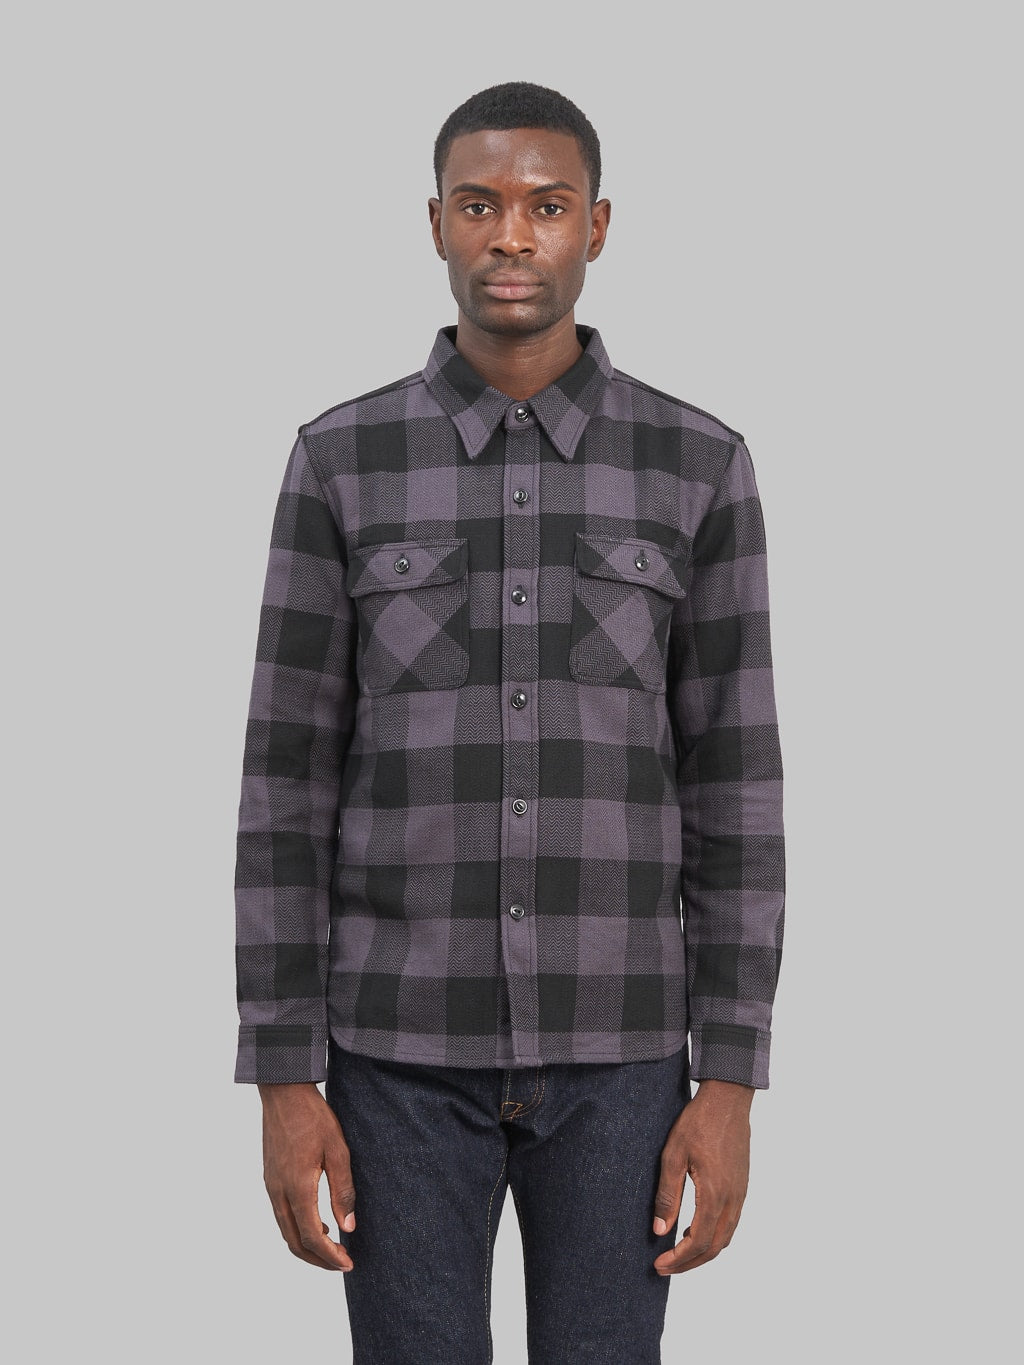 The Flat Head Block Check Flannel Shirt Grey model front fit